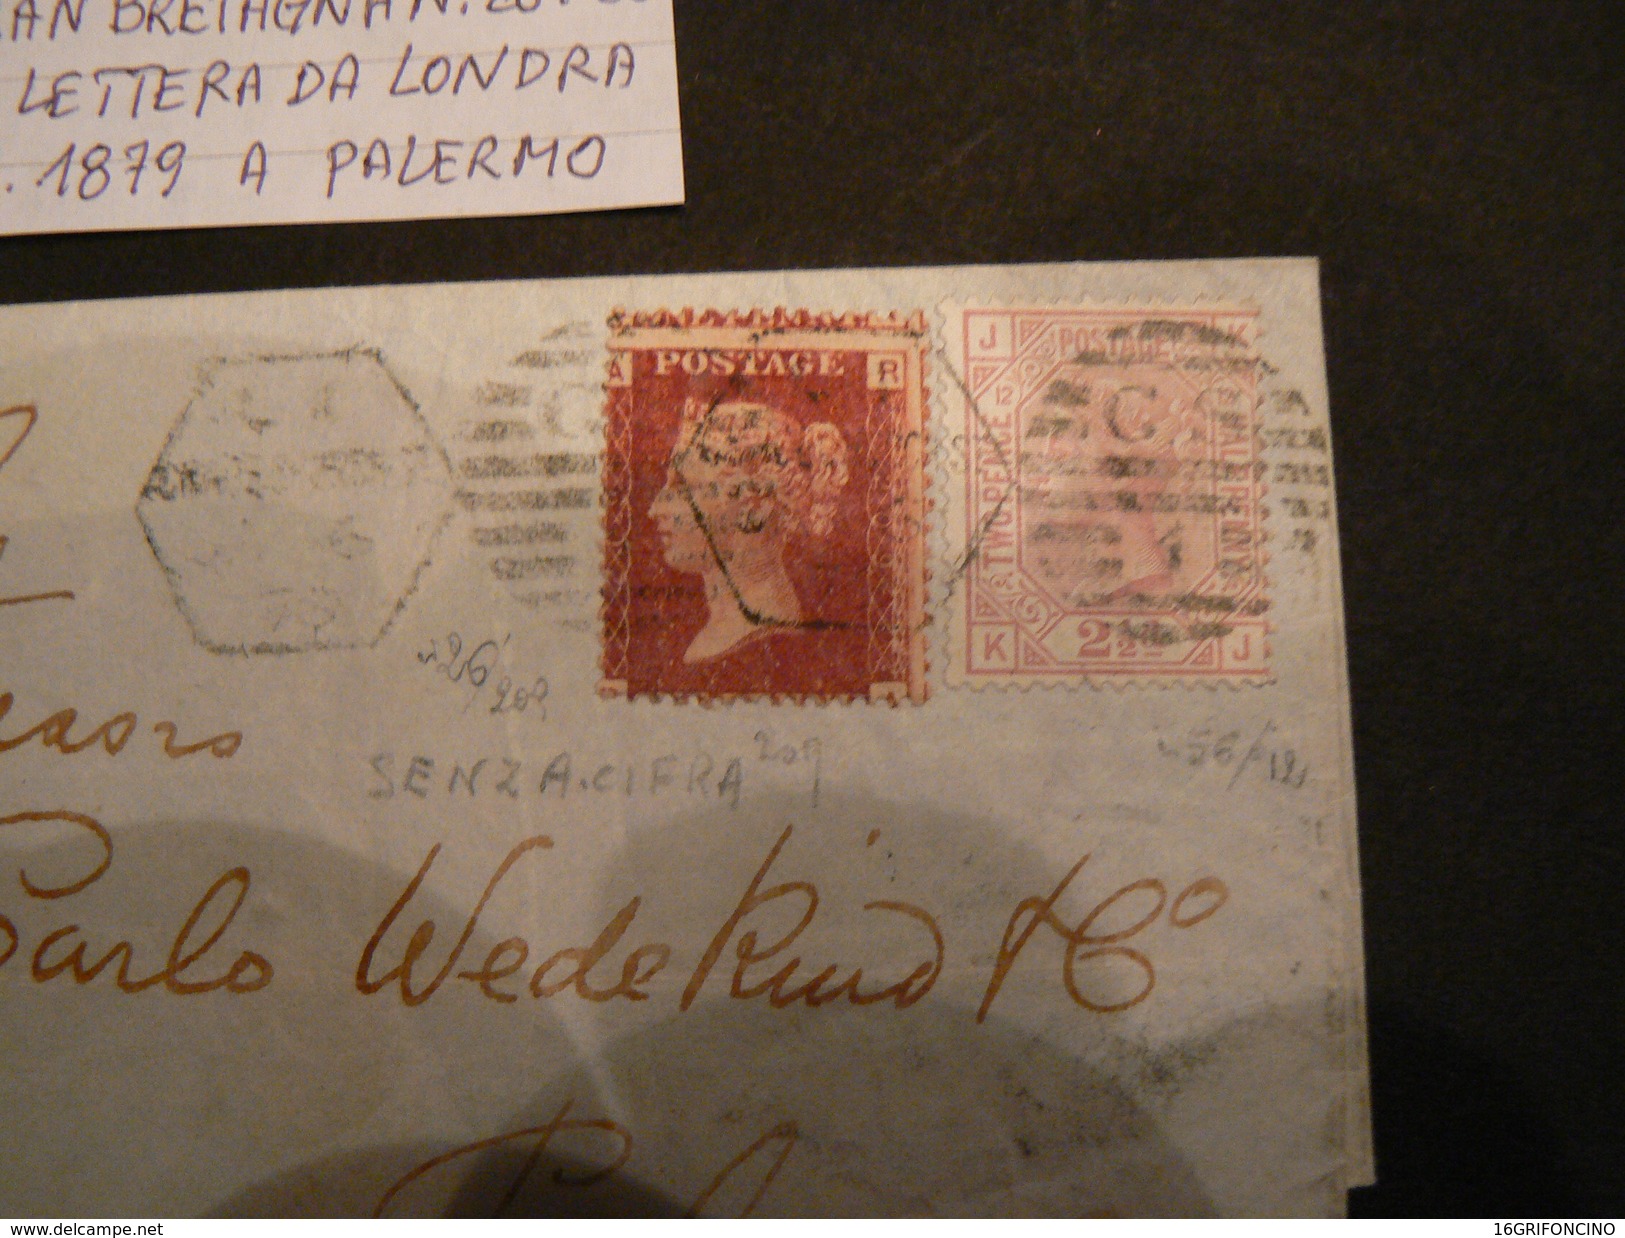 6 - 1 - 1870 SMALL LETTER WITH POSTAGESTAMPS OF1858 OF 1P. + 2 +1/2 P. ROSE...BELLA LETTERINA + 2 FRANCOBOLLI - Brieven En Documenten